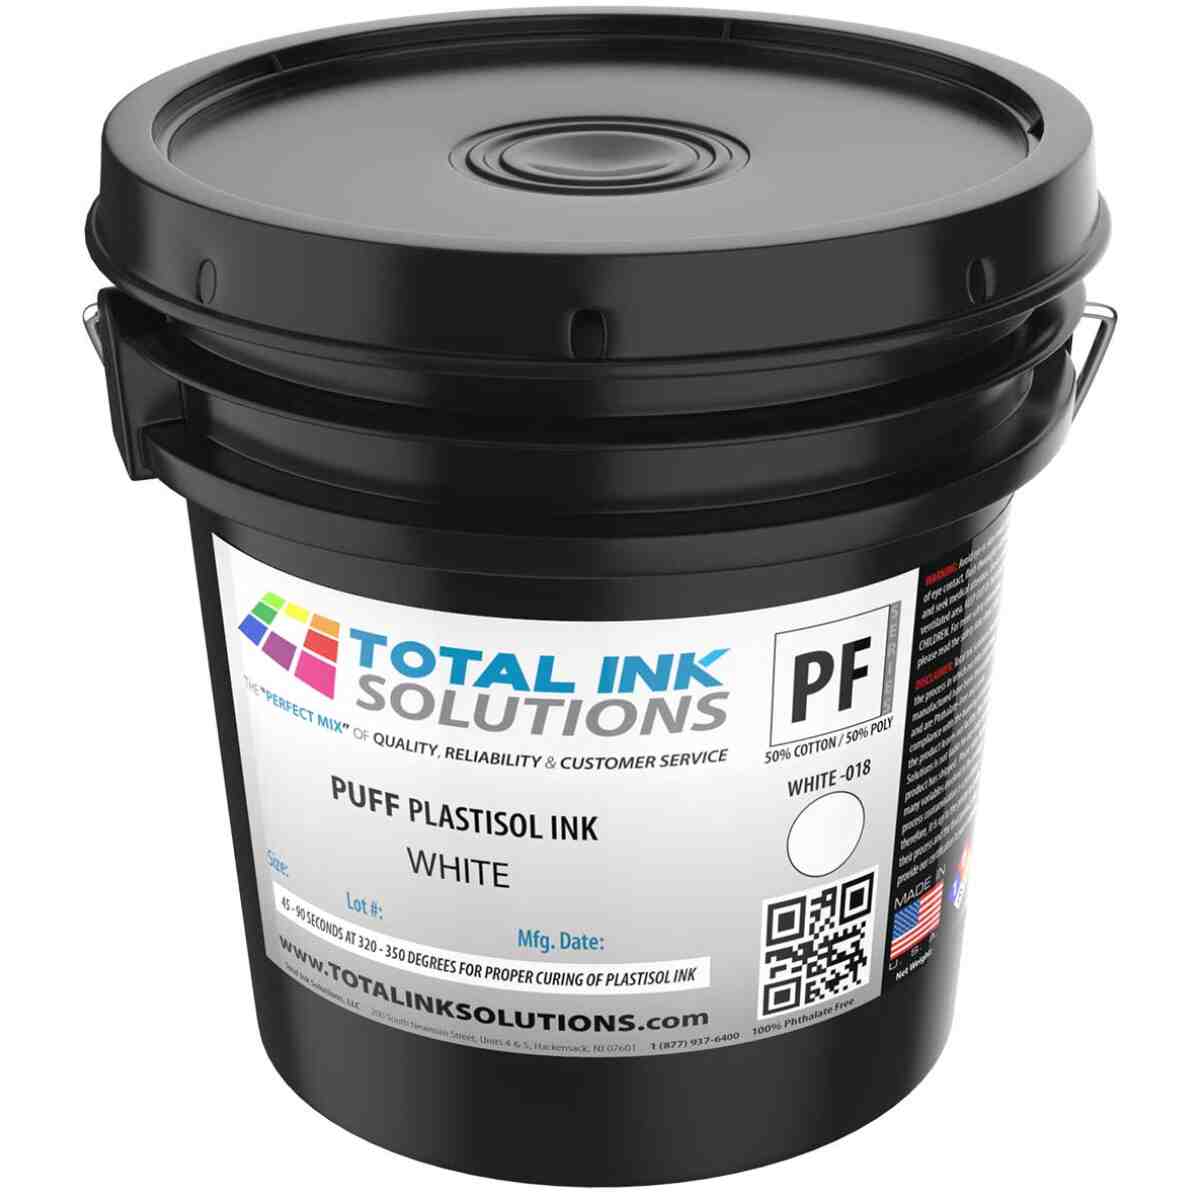 Puff Plastisol Ink - White - Gallon TOTAL INK SOLUTIONS®